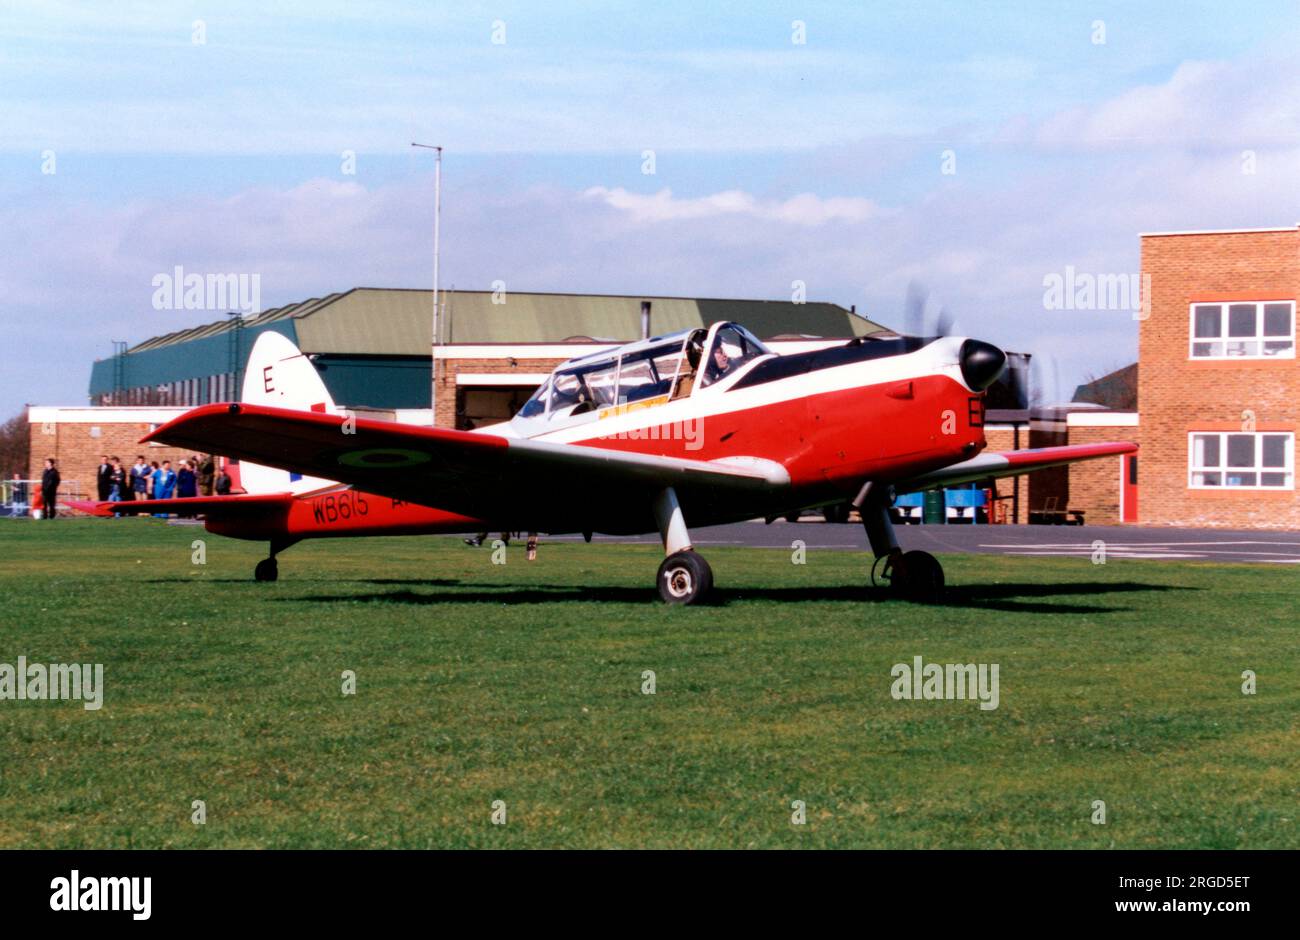 Army Air Corps - de Havilland Canada DHC.1 Chipmunk T.10 WB615 - E (msn C1/0056), at AAC Middle Wallop Stock Photo